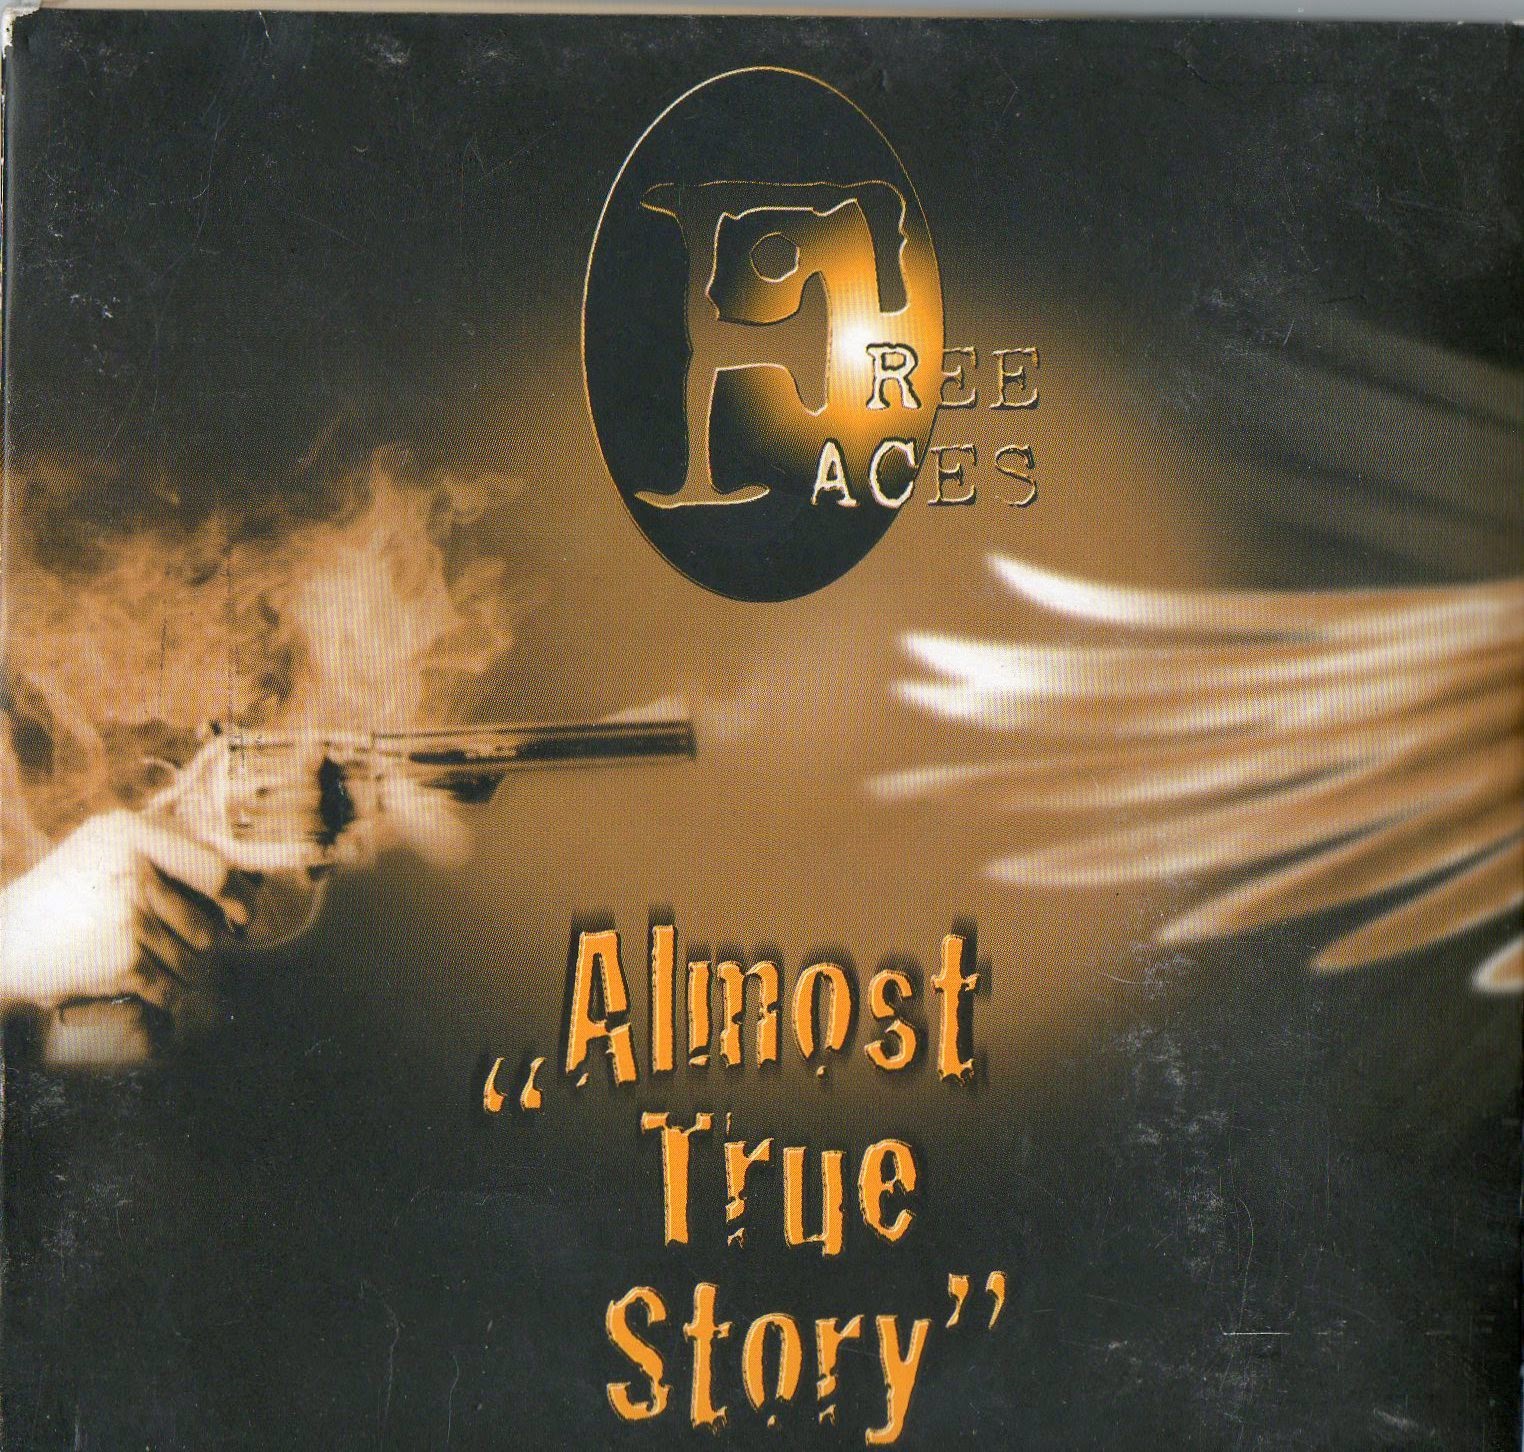 FREE FACES, ALMOST TRUE STORY, CD